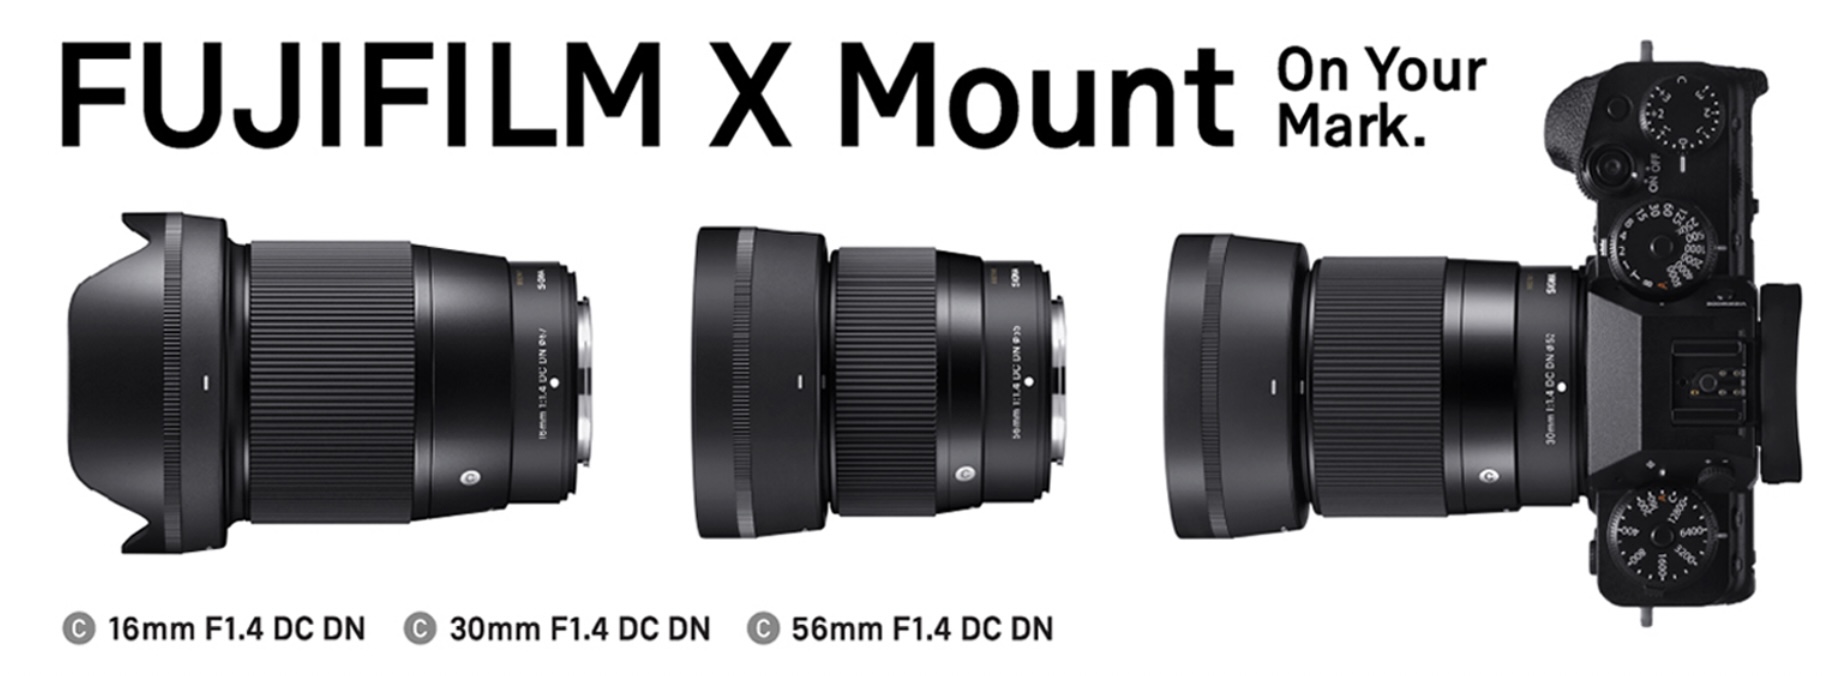 Sigma Joins Fujifilm X Mount with 16mmF1.4, 30mmF1.4 and 56mmF1.4 AF Lenses  - First Looks, Samples and Pre-Orders - Fuji Rumors